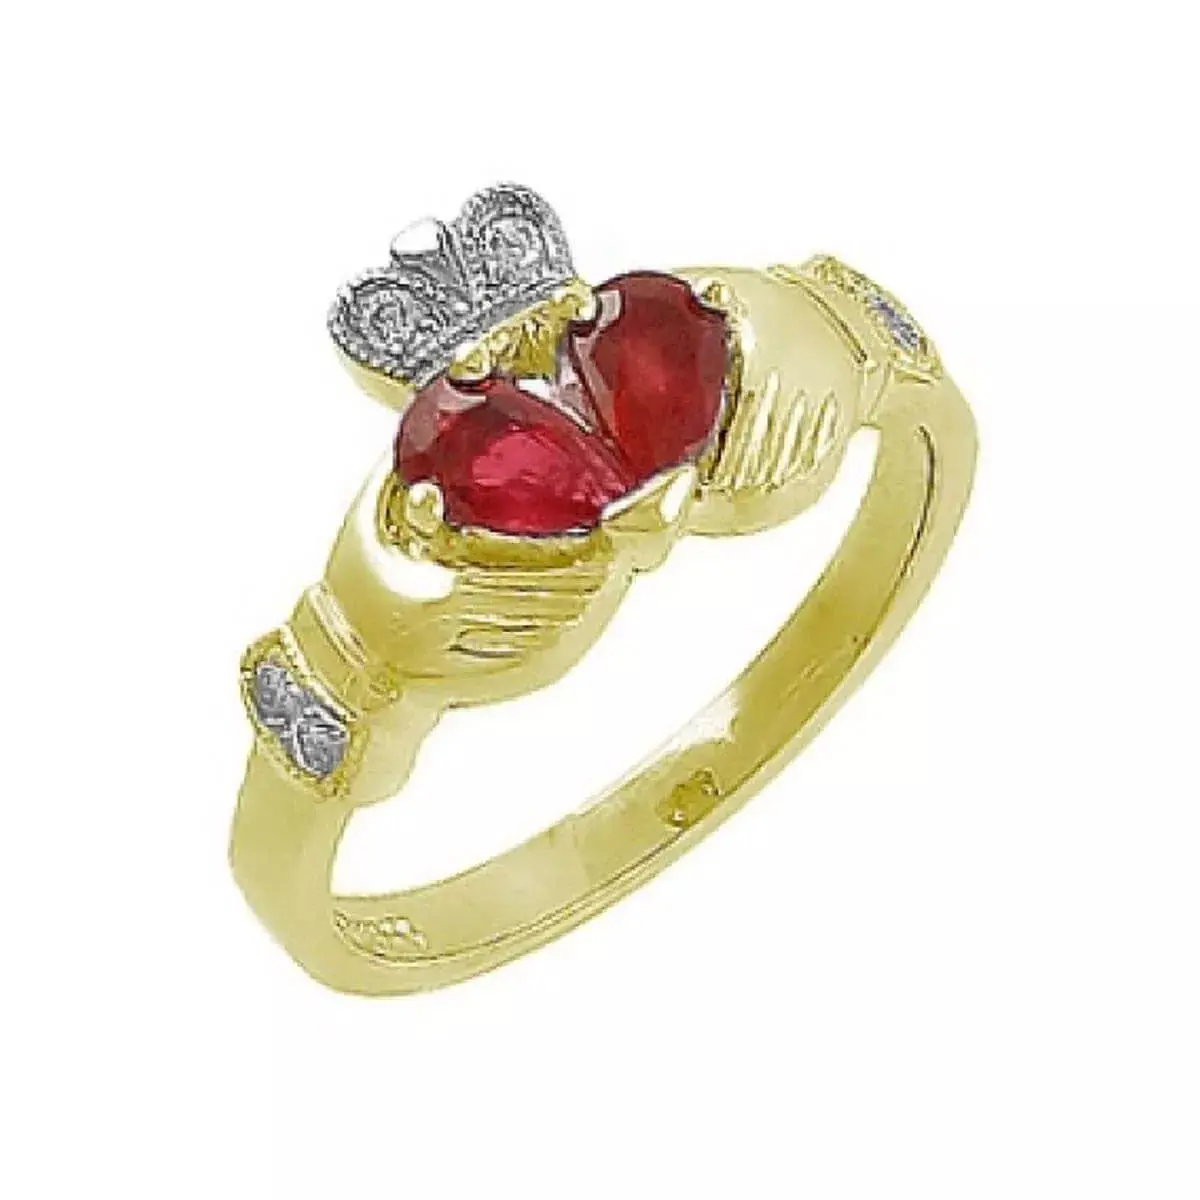 Pearshape Ruby And Diamond Claddagh Ring...